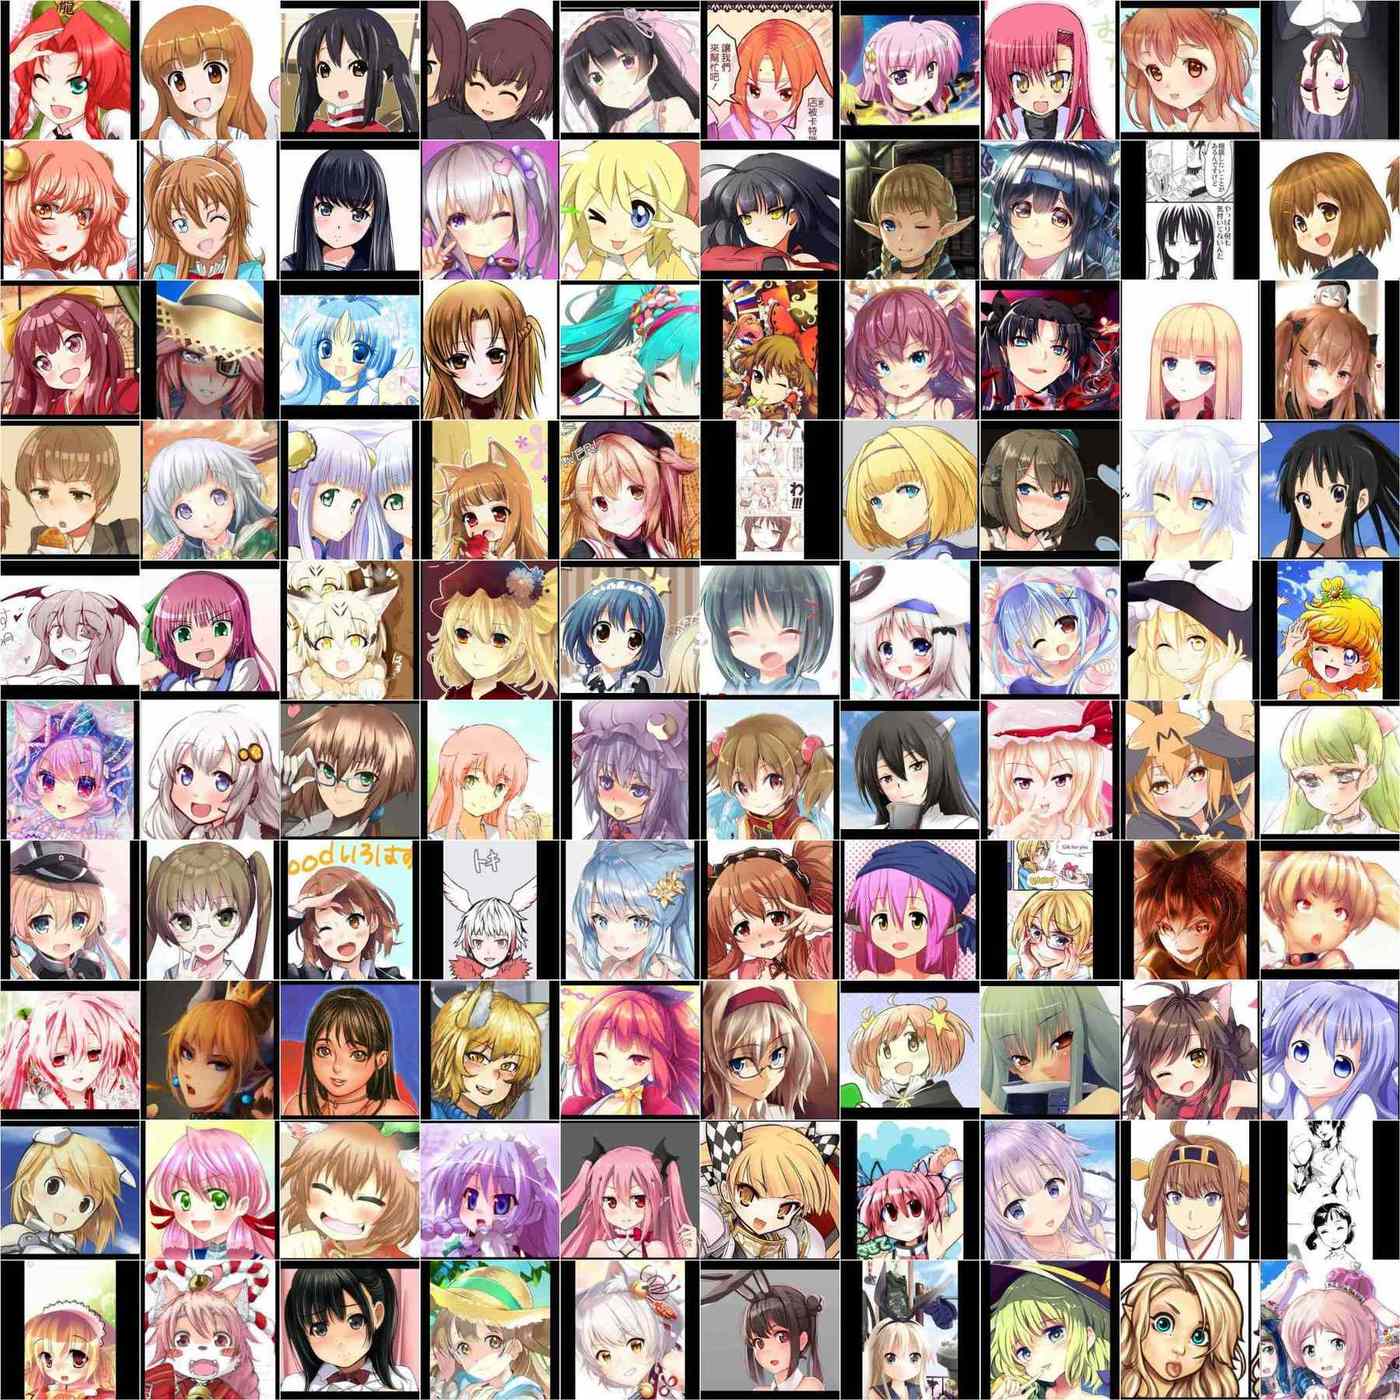 100 real faces from the ‘portrait’ dataset (SFW Danbooru2018 cropped with expanded margins) in a 10×10 grid